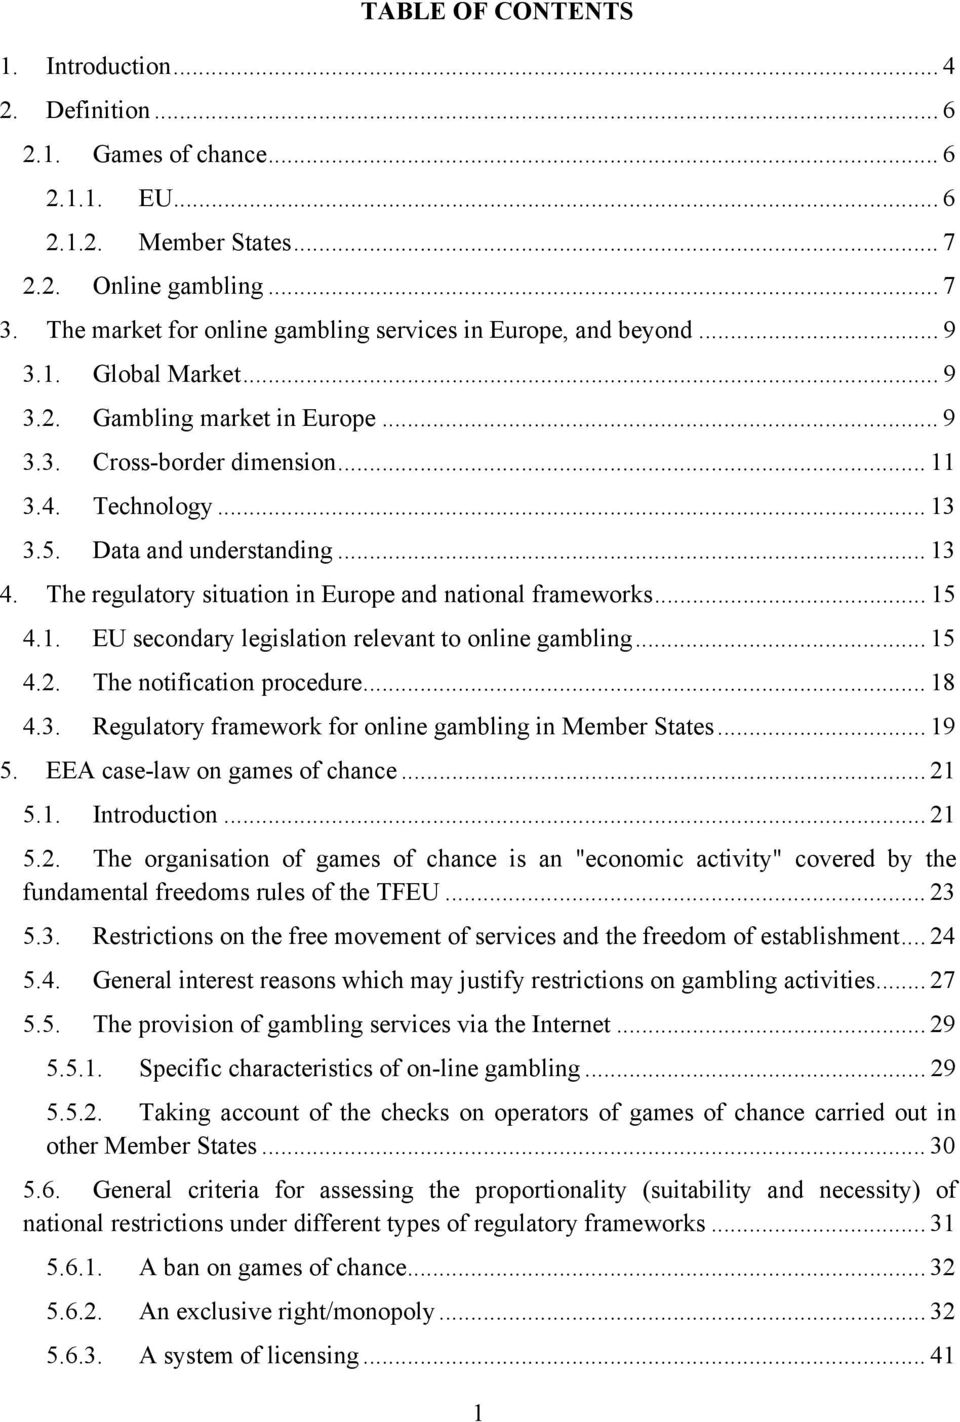 Data and understanding... 13 4. The regulatory situation in Europe and national frameworks... 15 4.1. EU secondary legislation relevant to online gambling... 15 4.2. The notification procedure... 18 4.